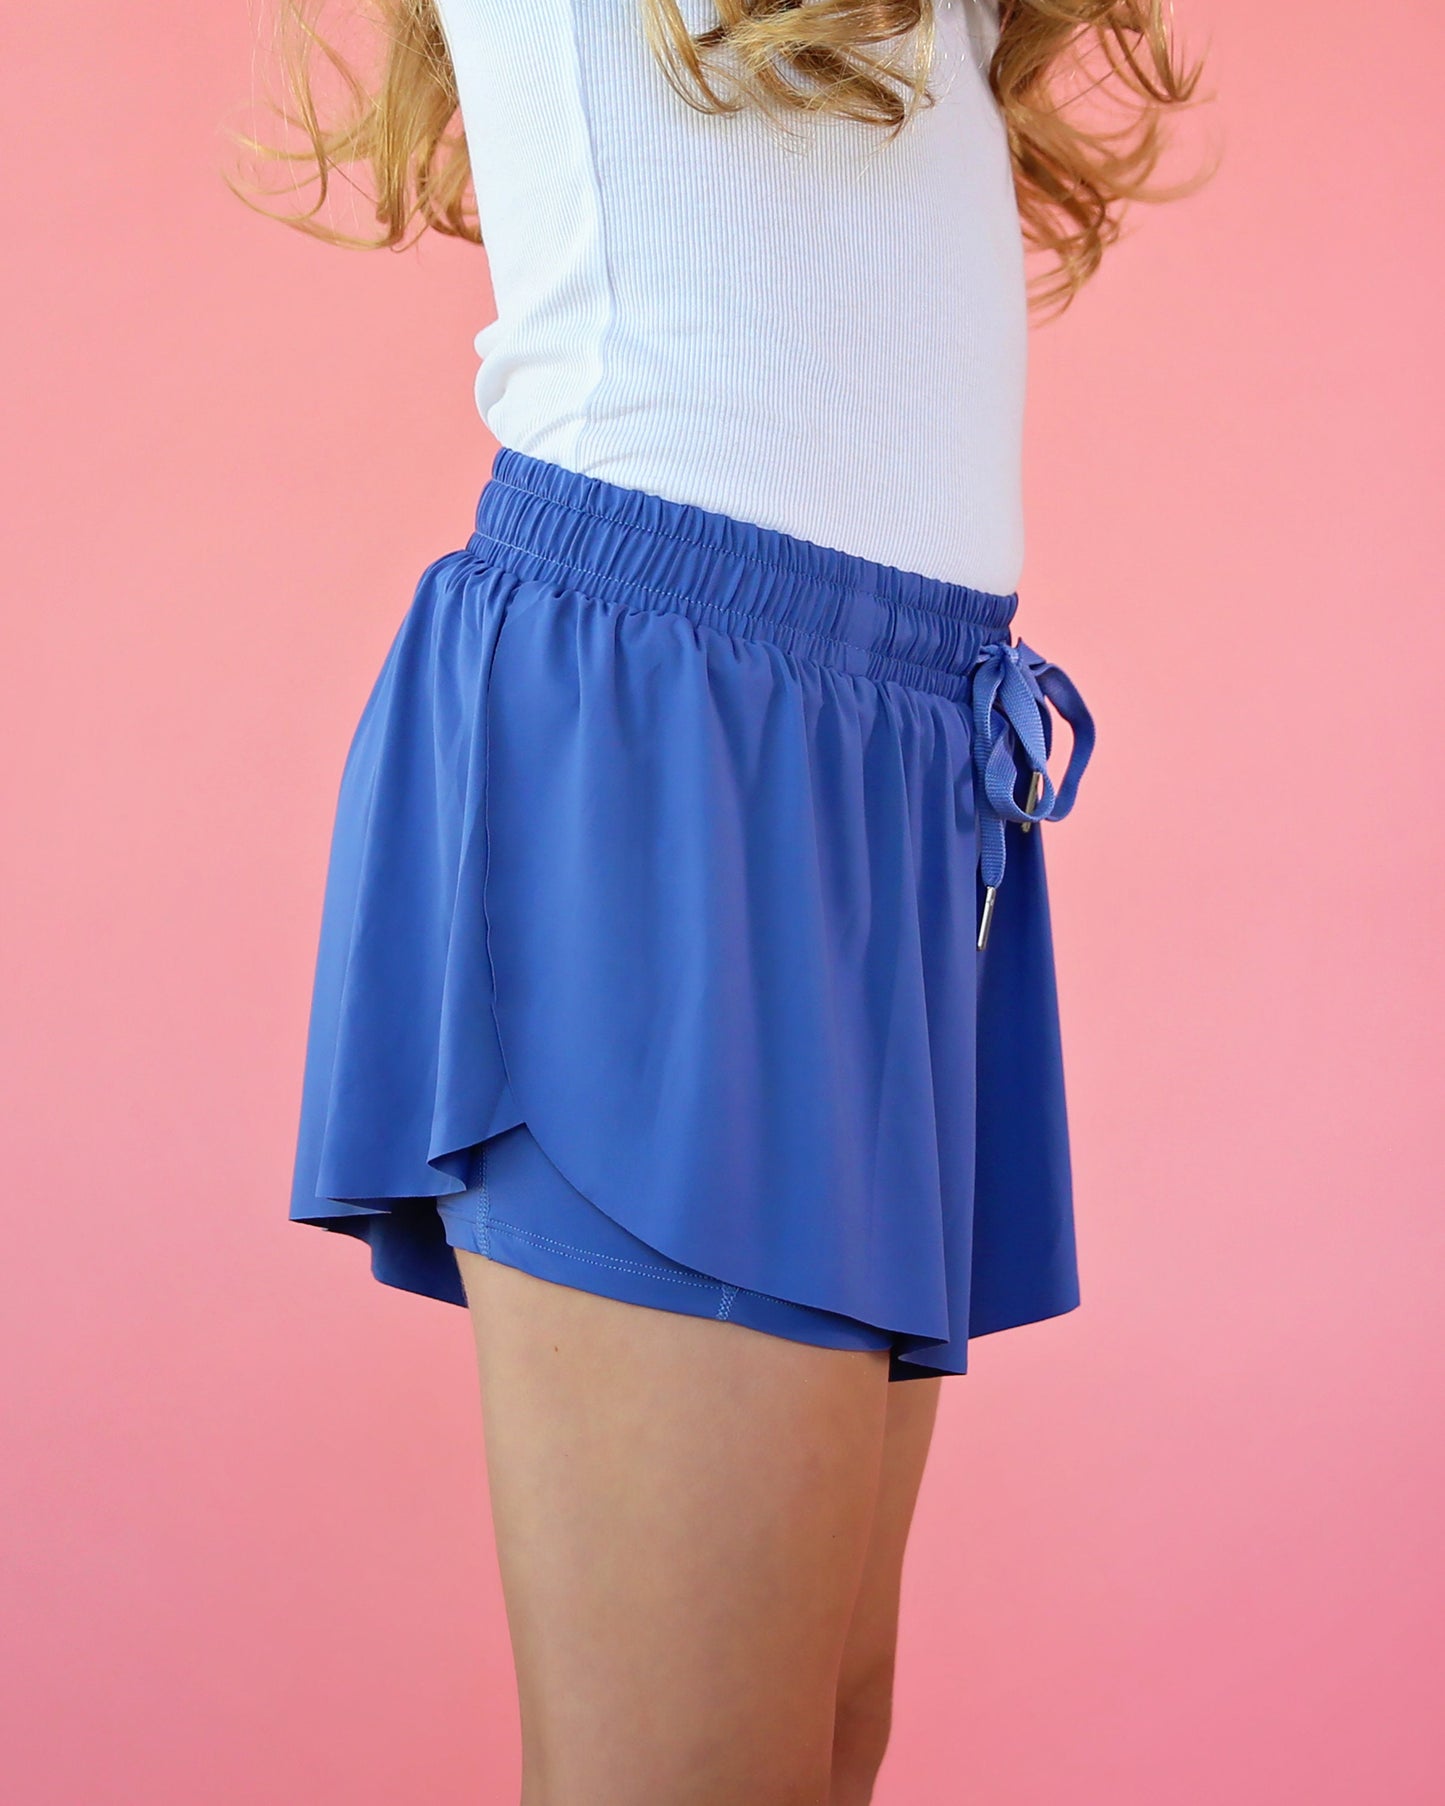 Butterly Shorts in Periwinkle